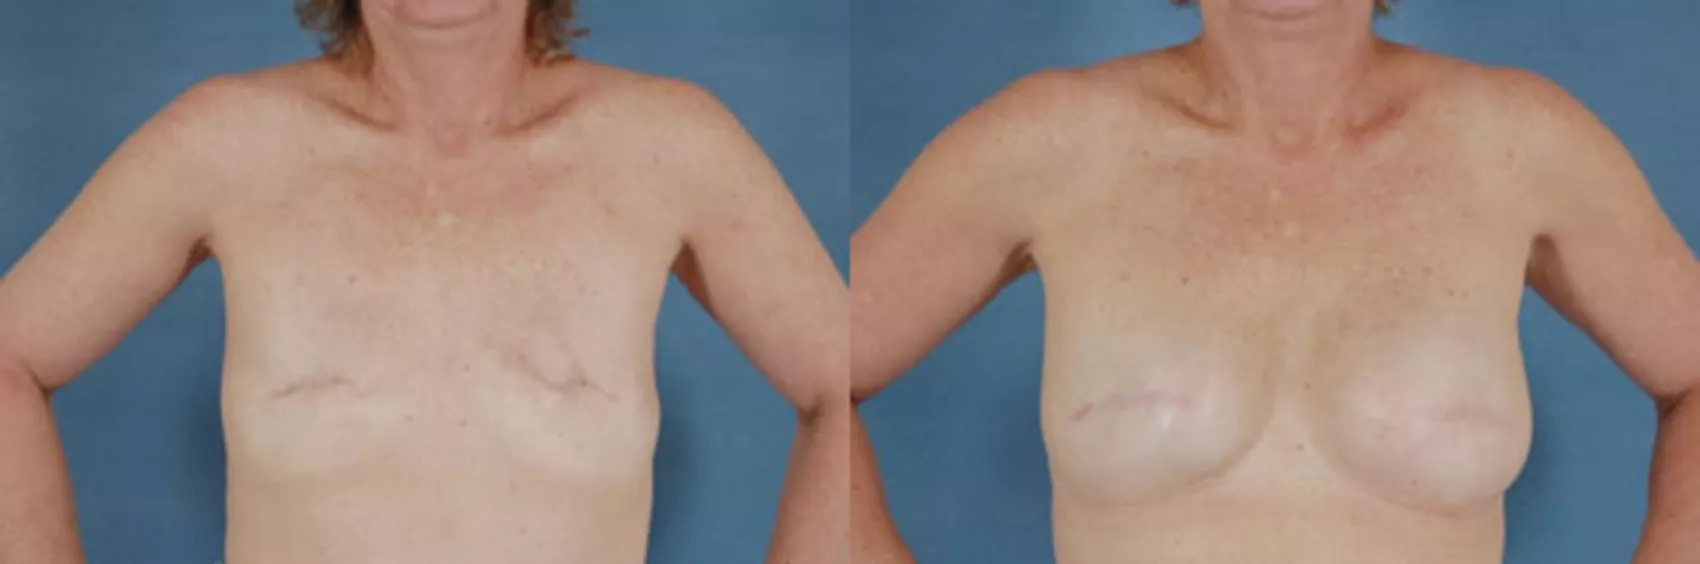 Surgeons repair woman's 'crooked breasts' following a double mastectomy